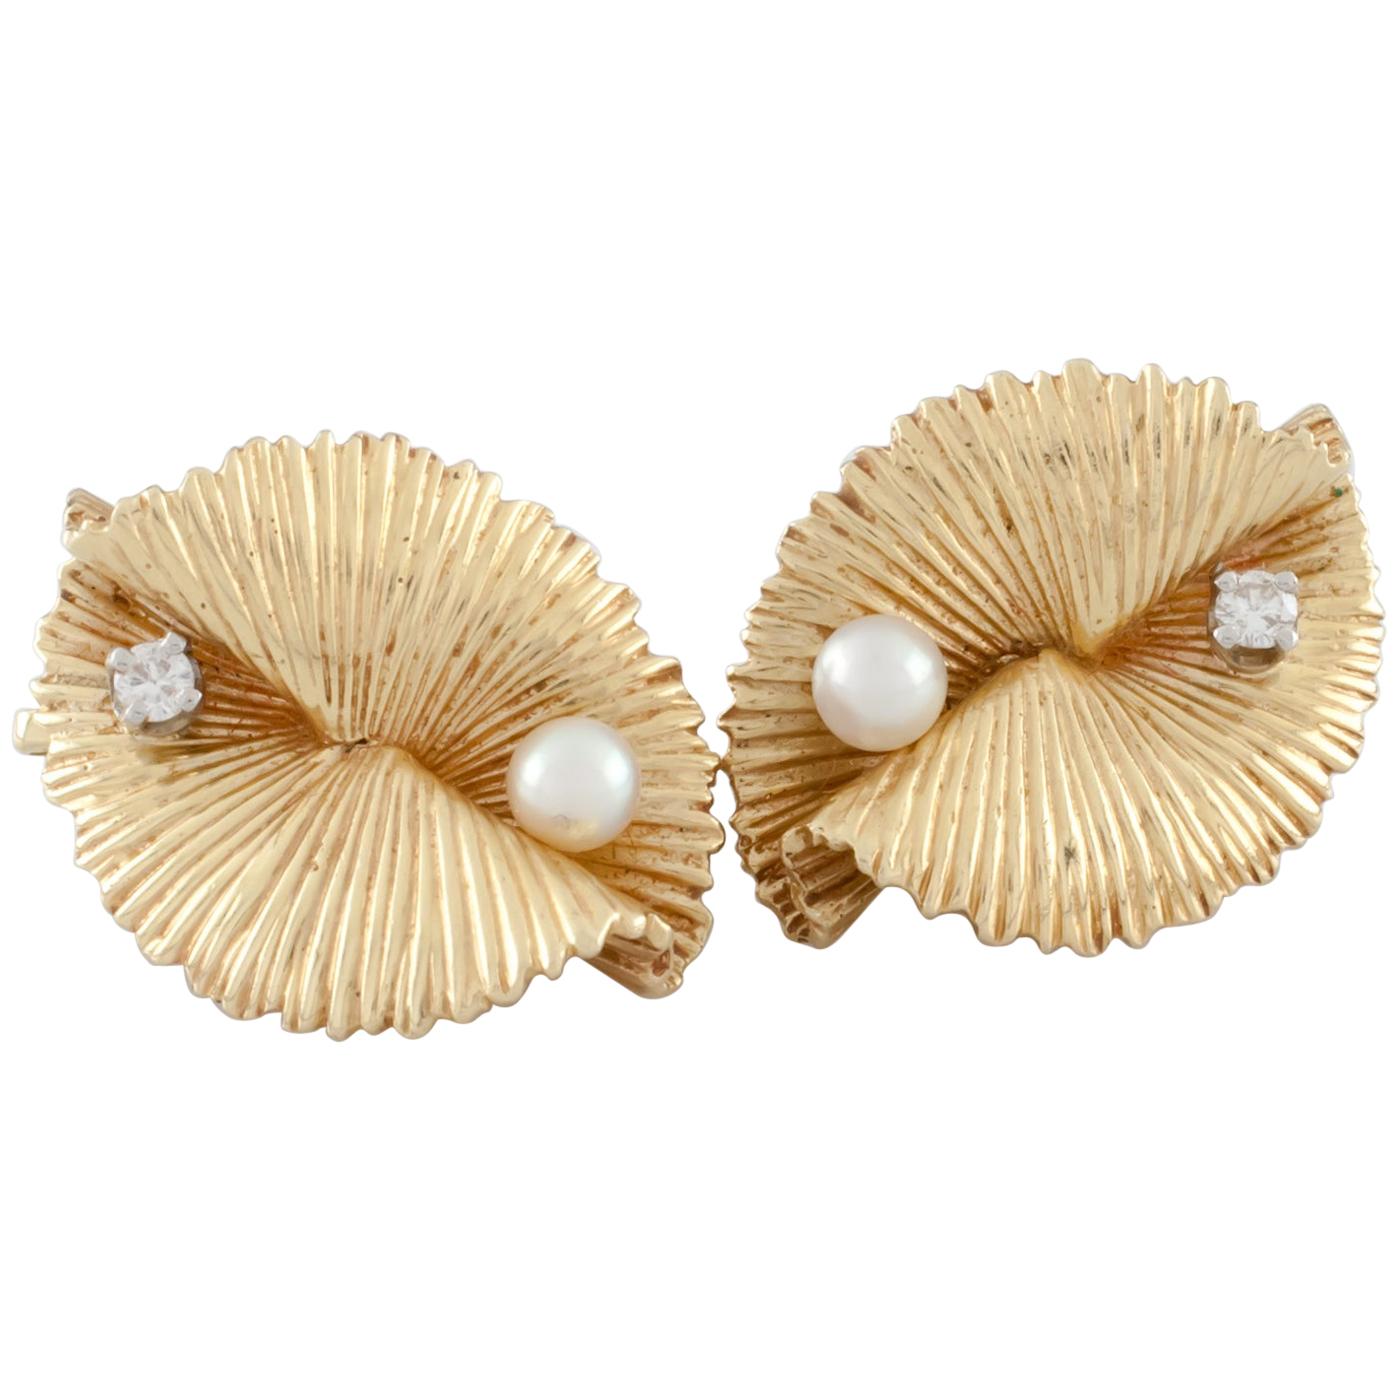 Tiffany & Co. Ruffle Diamond and Pearl Clip-On Earrings Set in 14K Yellow Gold